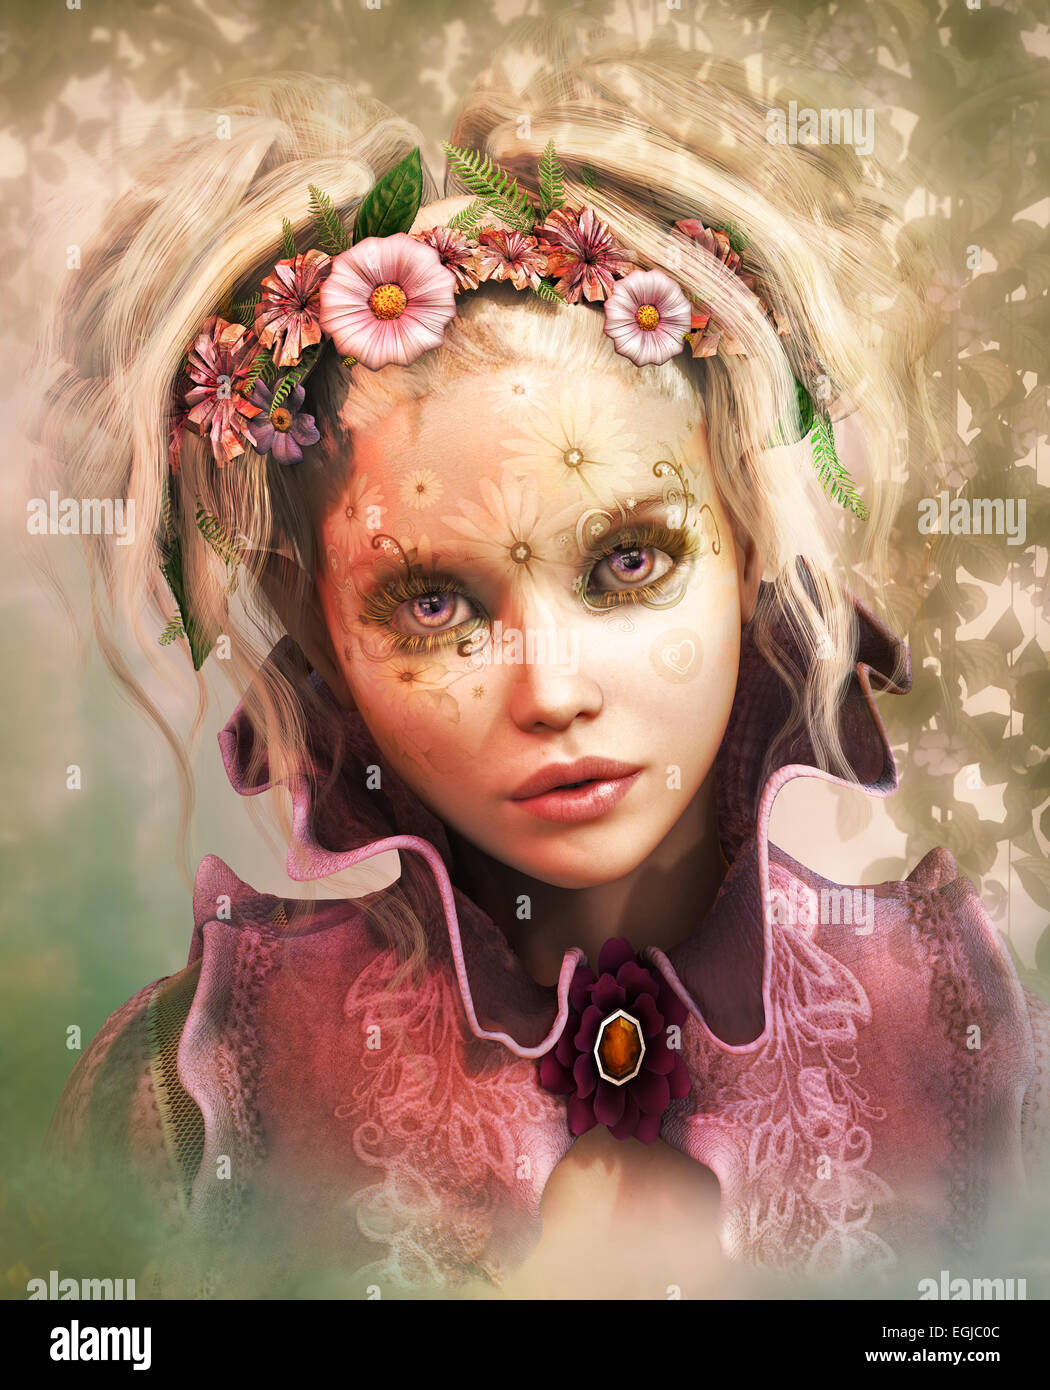 3d computer graphics of a Girl with colored flowers in her hair Stock Photo